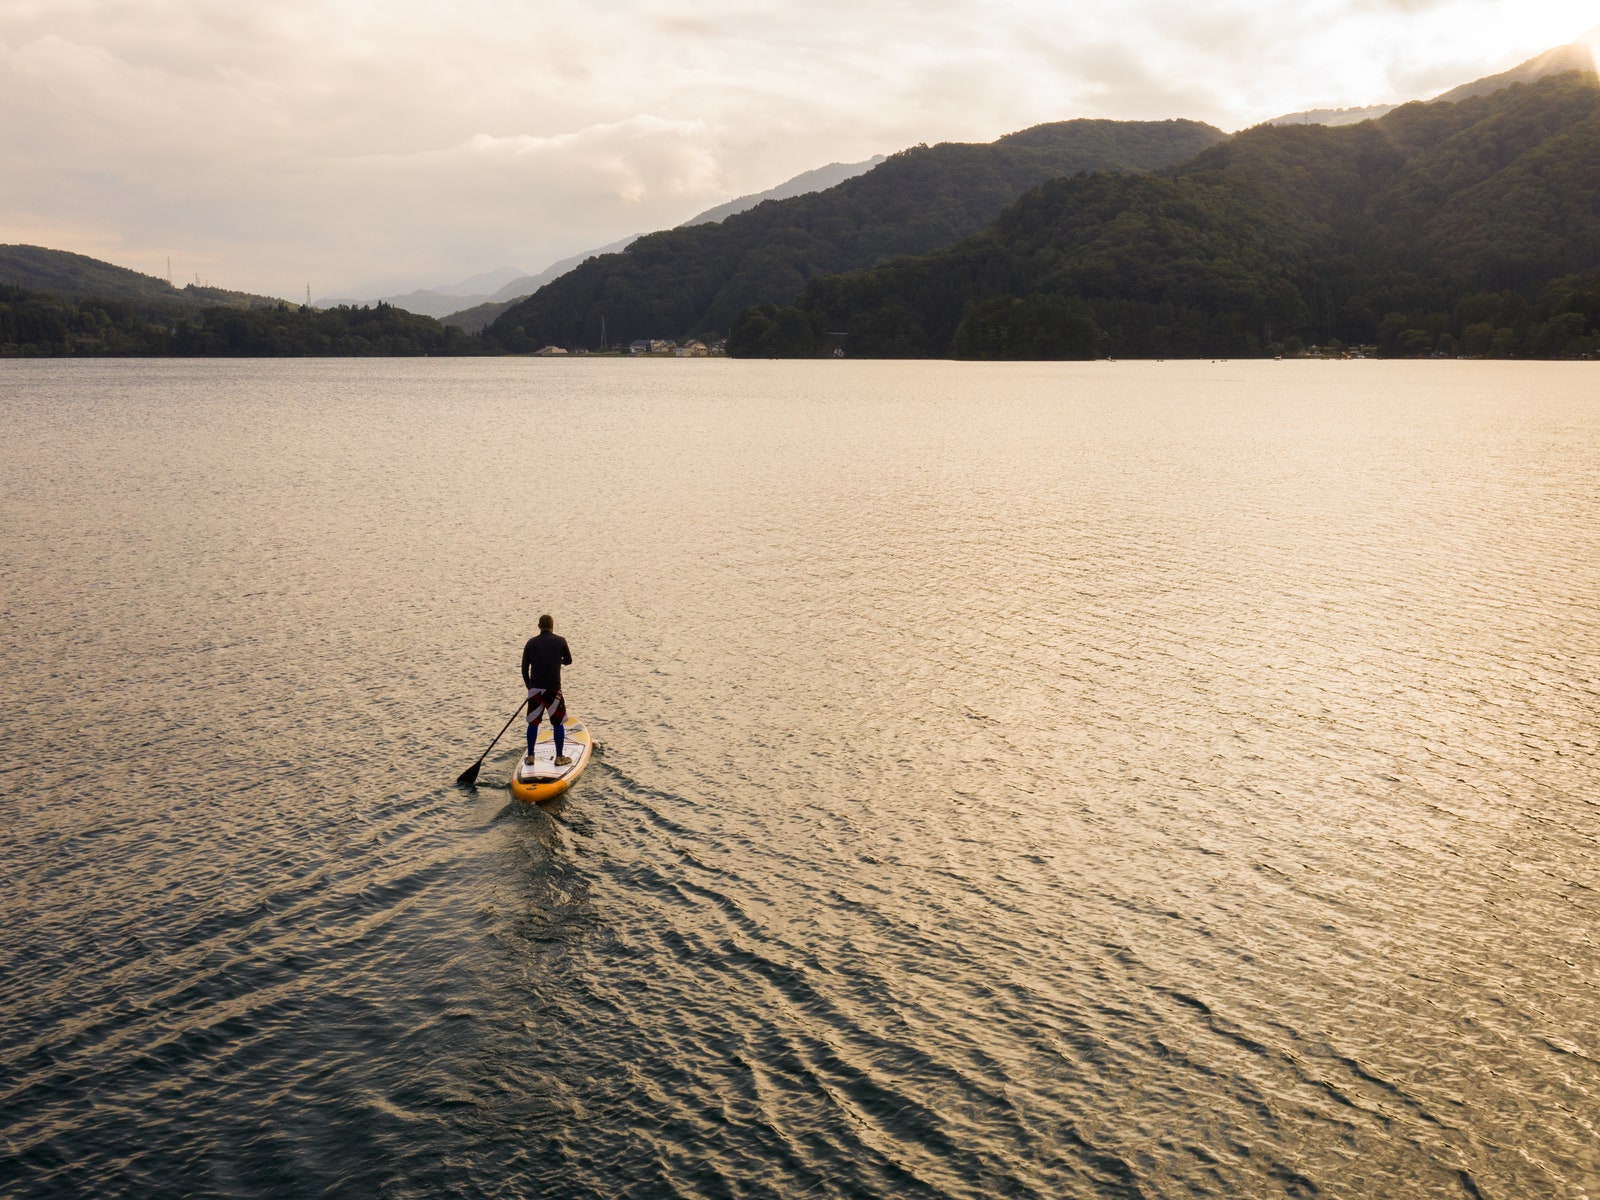 A man paddle boarding  alone in a large lake in the mountains during sunset